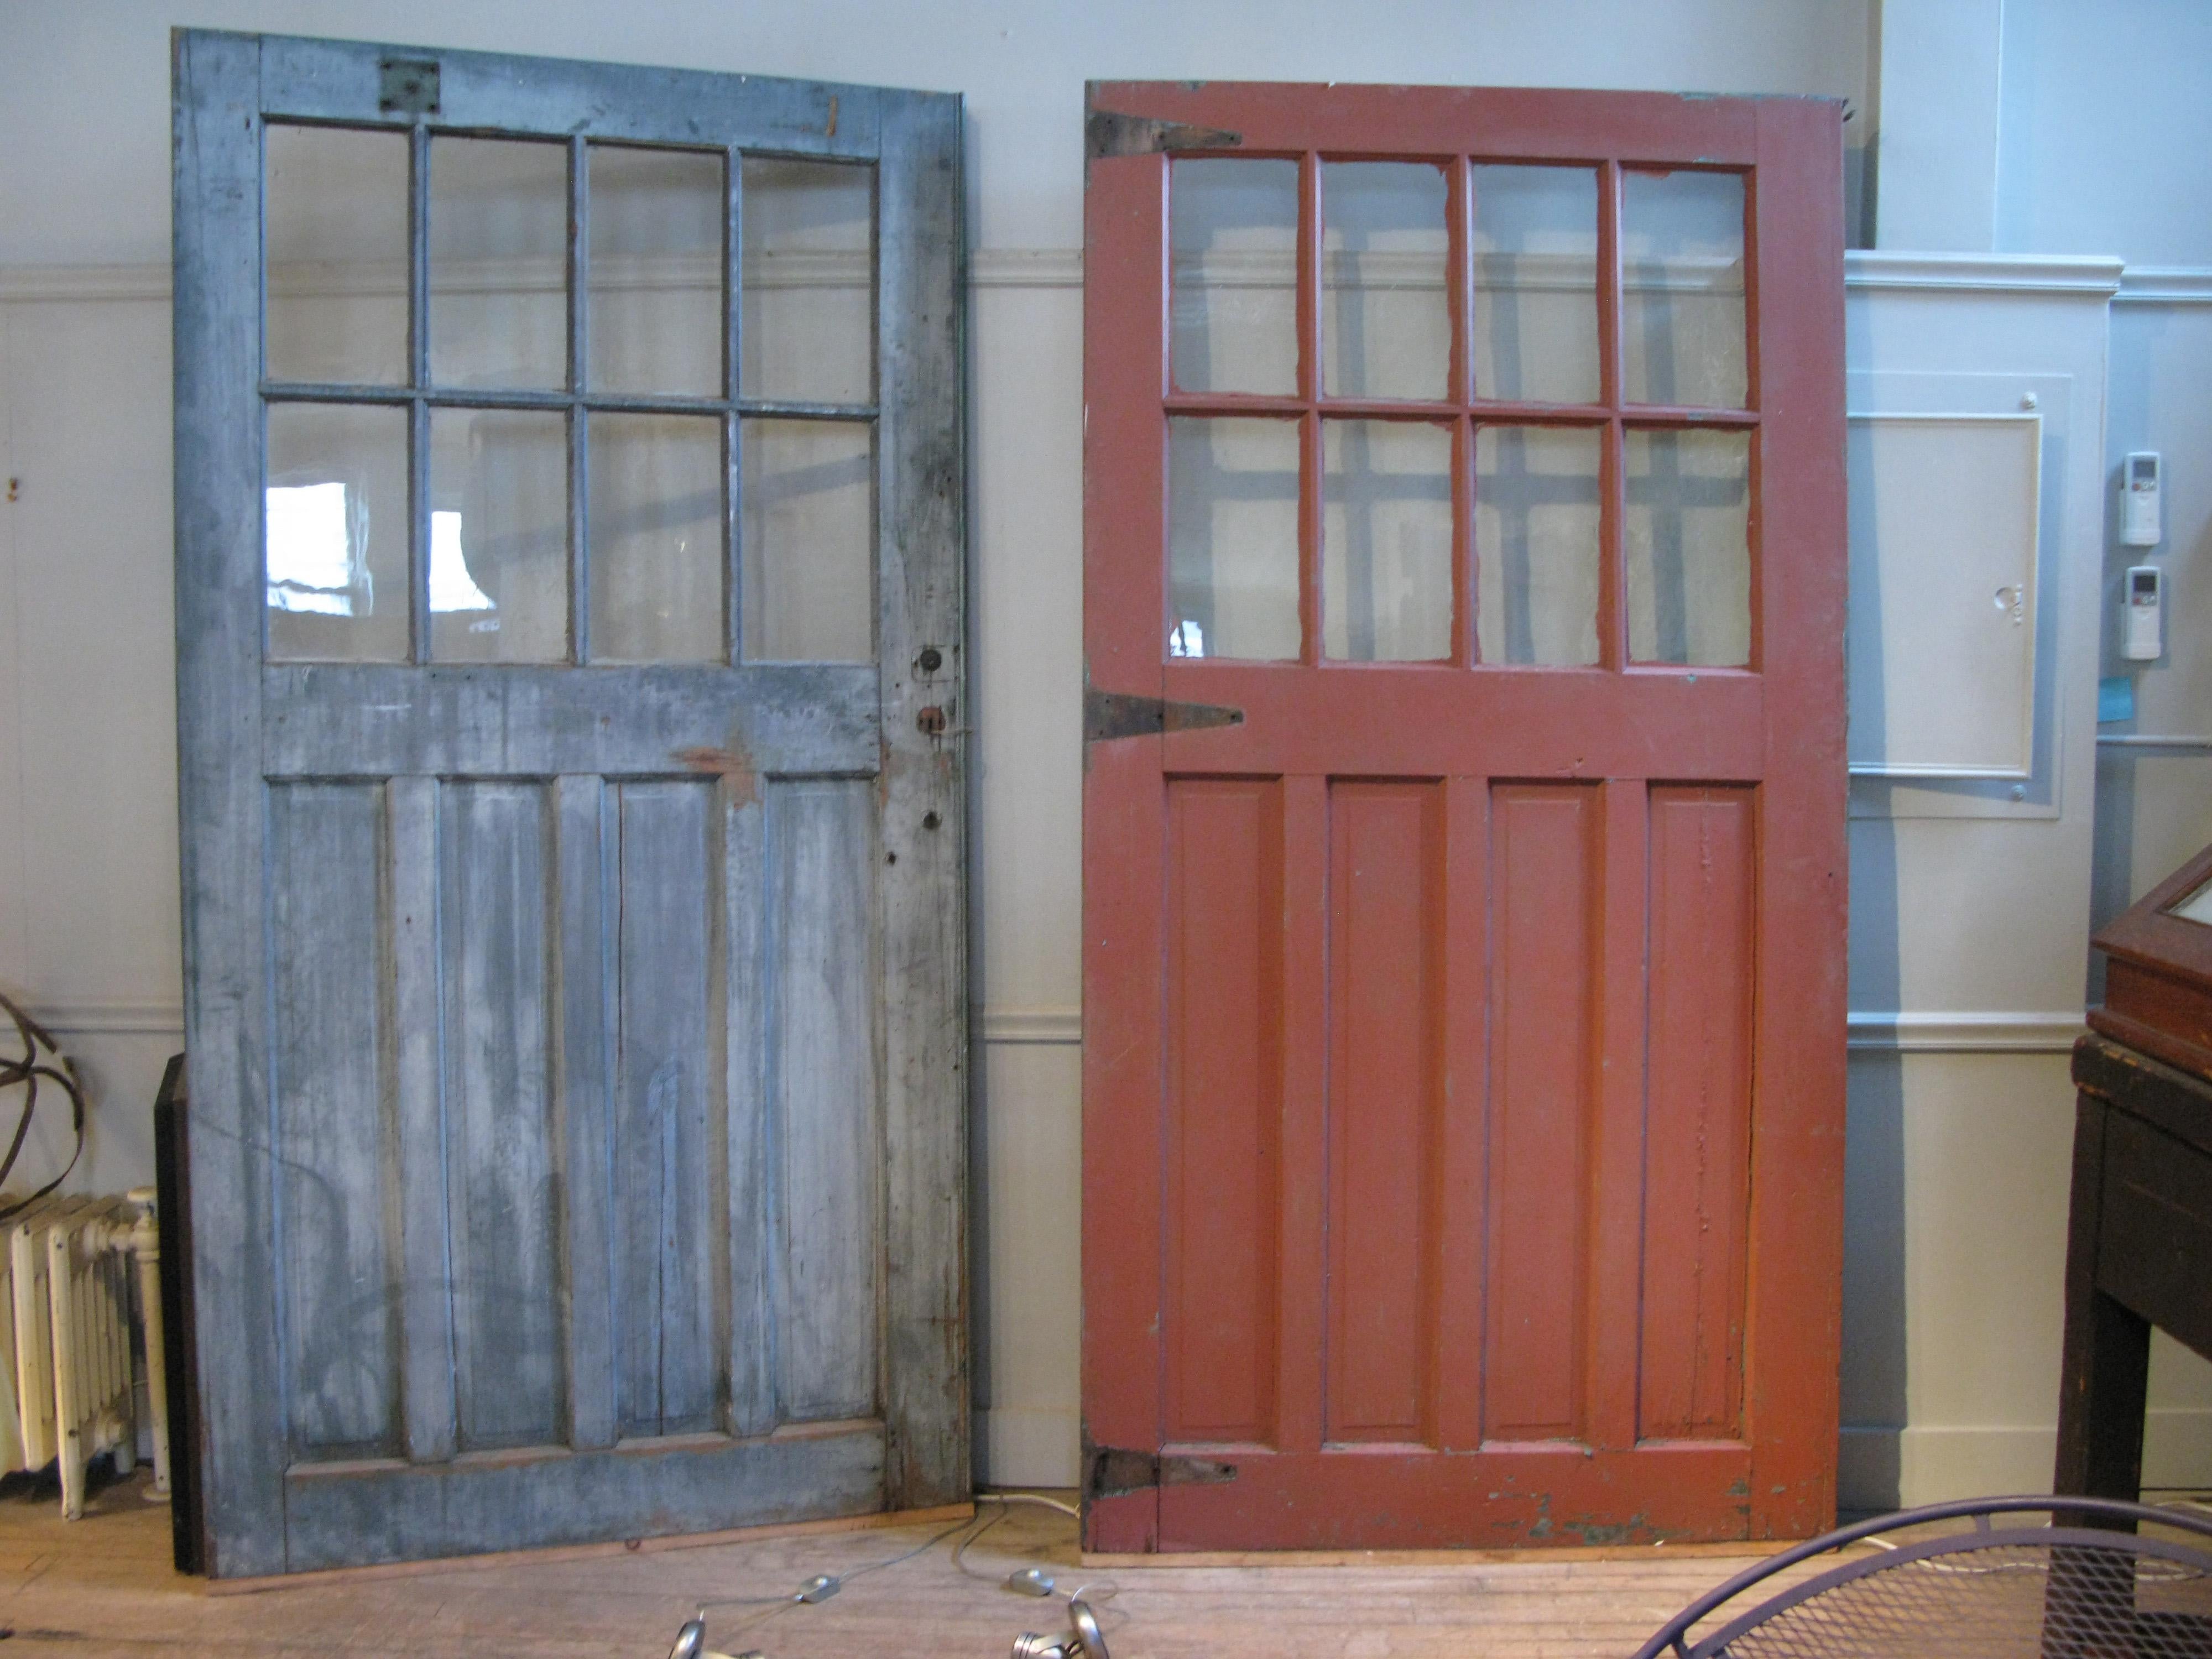 American Pair of Antique Barn Doors with Divided Pane Windows